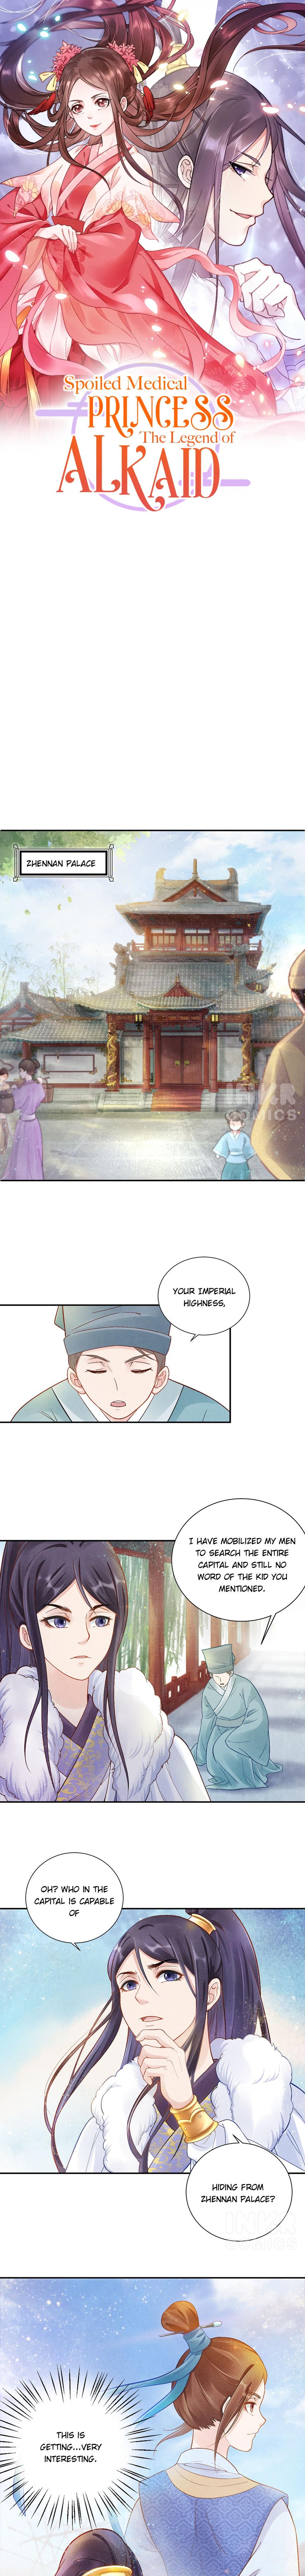 Spoiled Medical Princess: The Legend Of Alkaid - Page 1